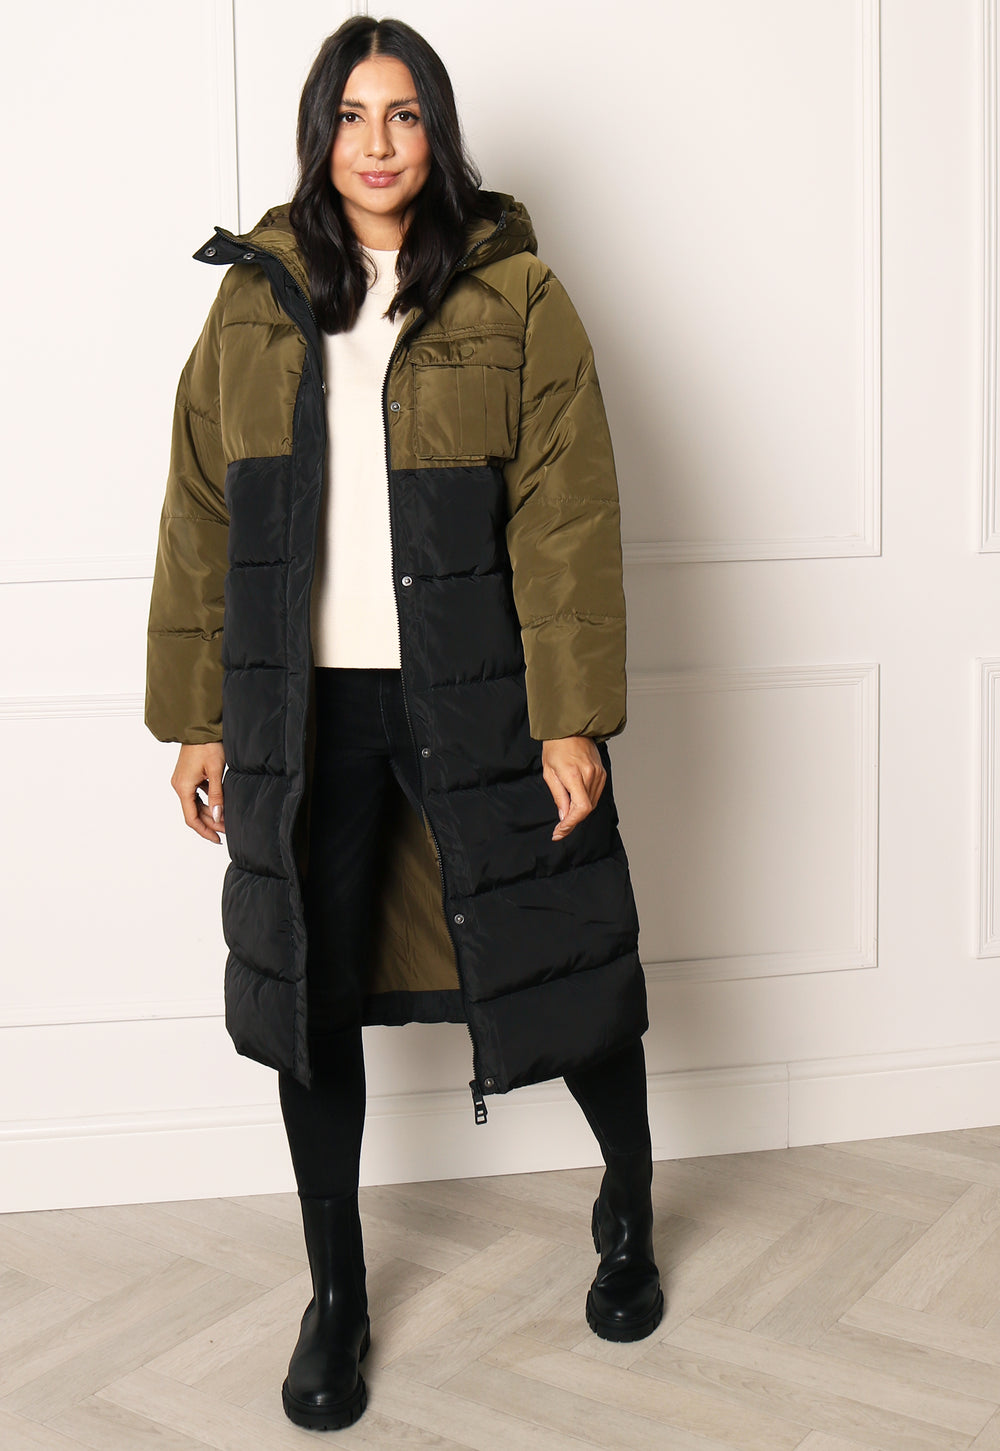 ONLY Becca Longline Midi Puffer Coat with Hood in Colour Block Black & Khaki - One Nation Clothing